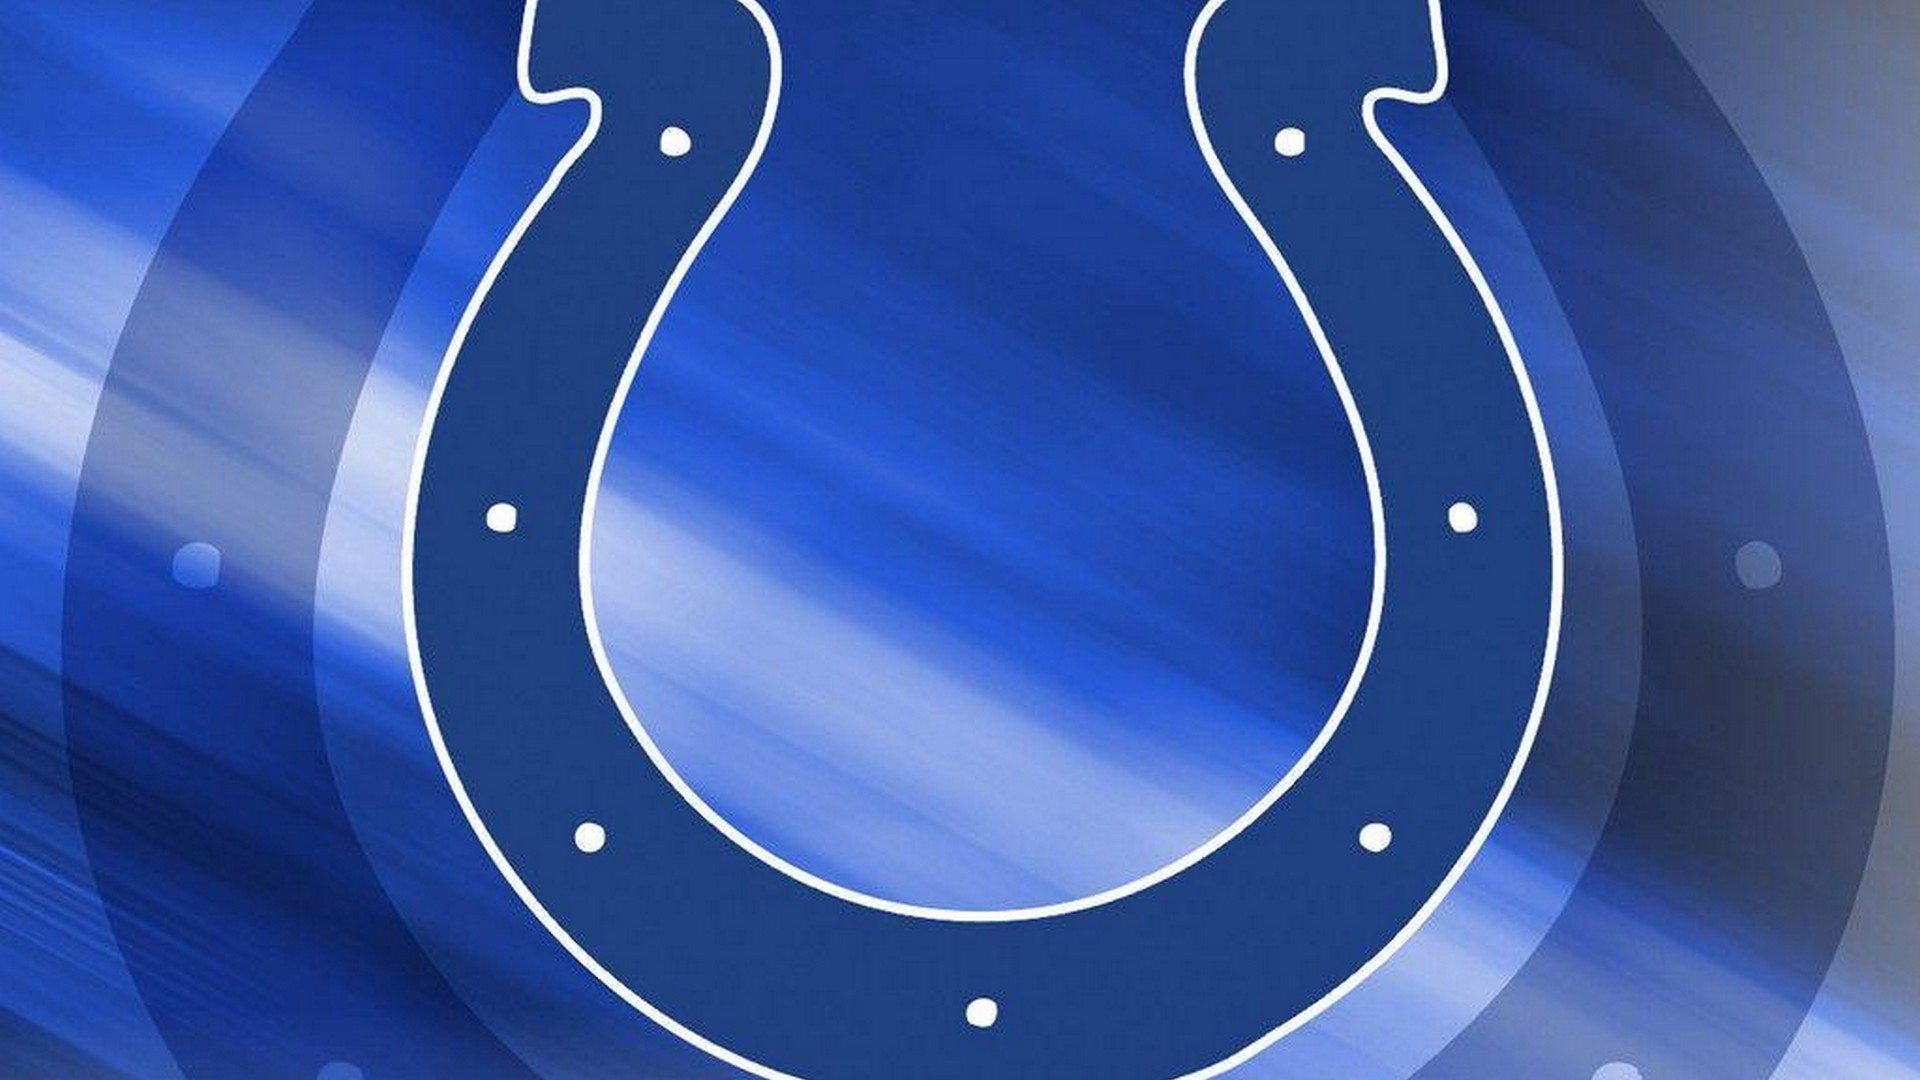 HD Backgrounds Indianapolis Colts NFL with resolution 1920x1080 pixel. You can make this wallpaper for your Mac or Windows Desktop Background, iPhone, Android or Tablet and another Smartphone device